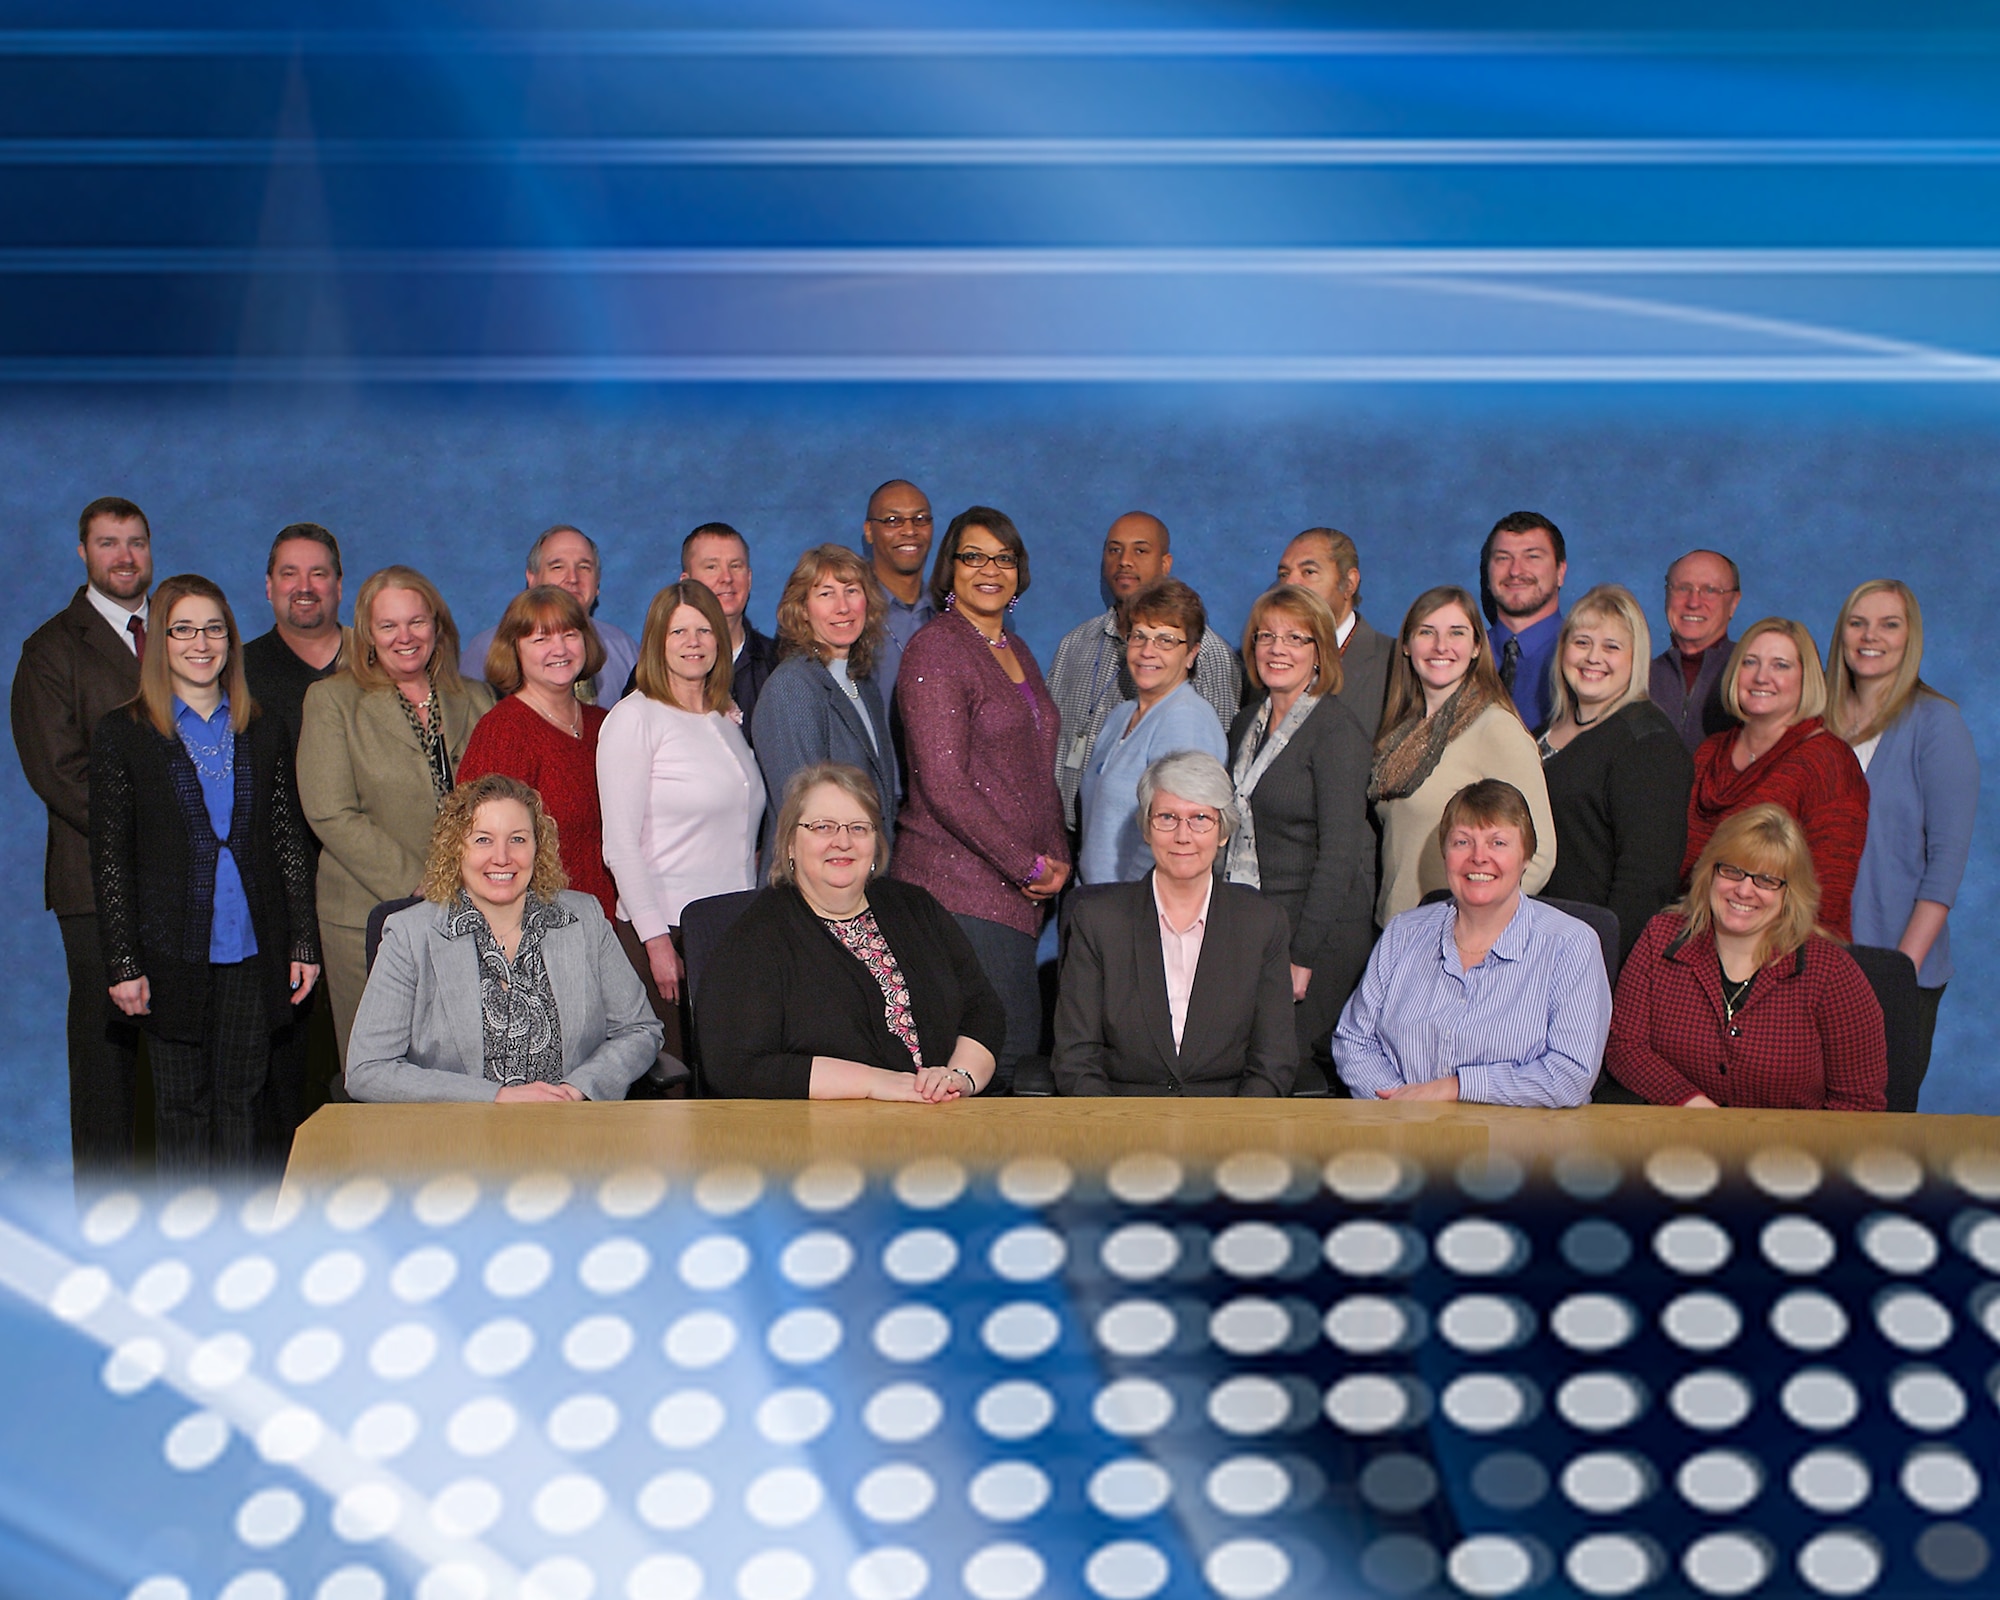 Pam Henson, pictured with the Financial Management team from AFRL Headquarters, says she will miss the people of AFRL the most, following her retirement June 2, 2015. (U.S. Air Force photo illustration by Jeremy Patton)